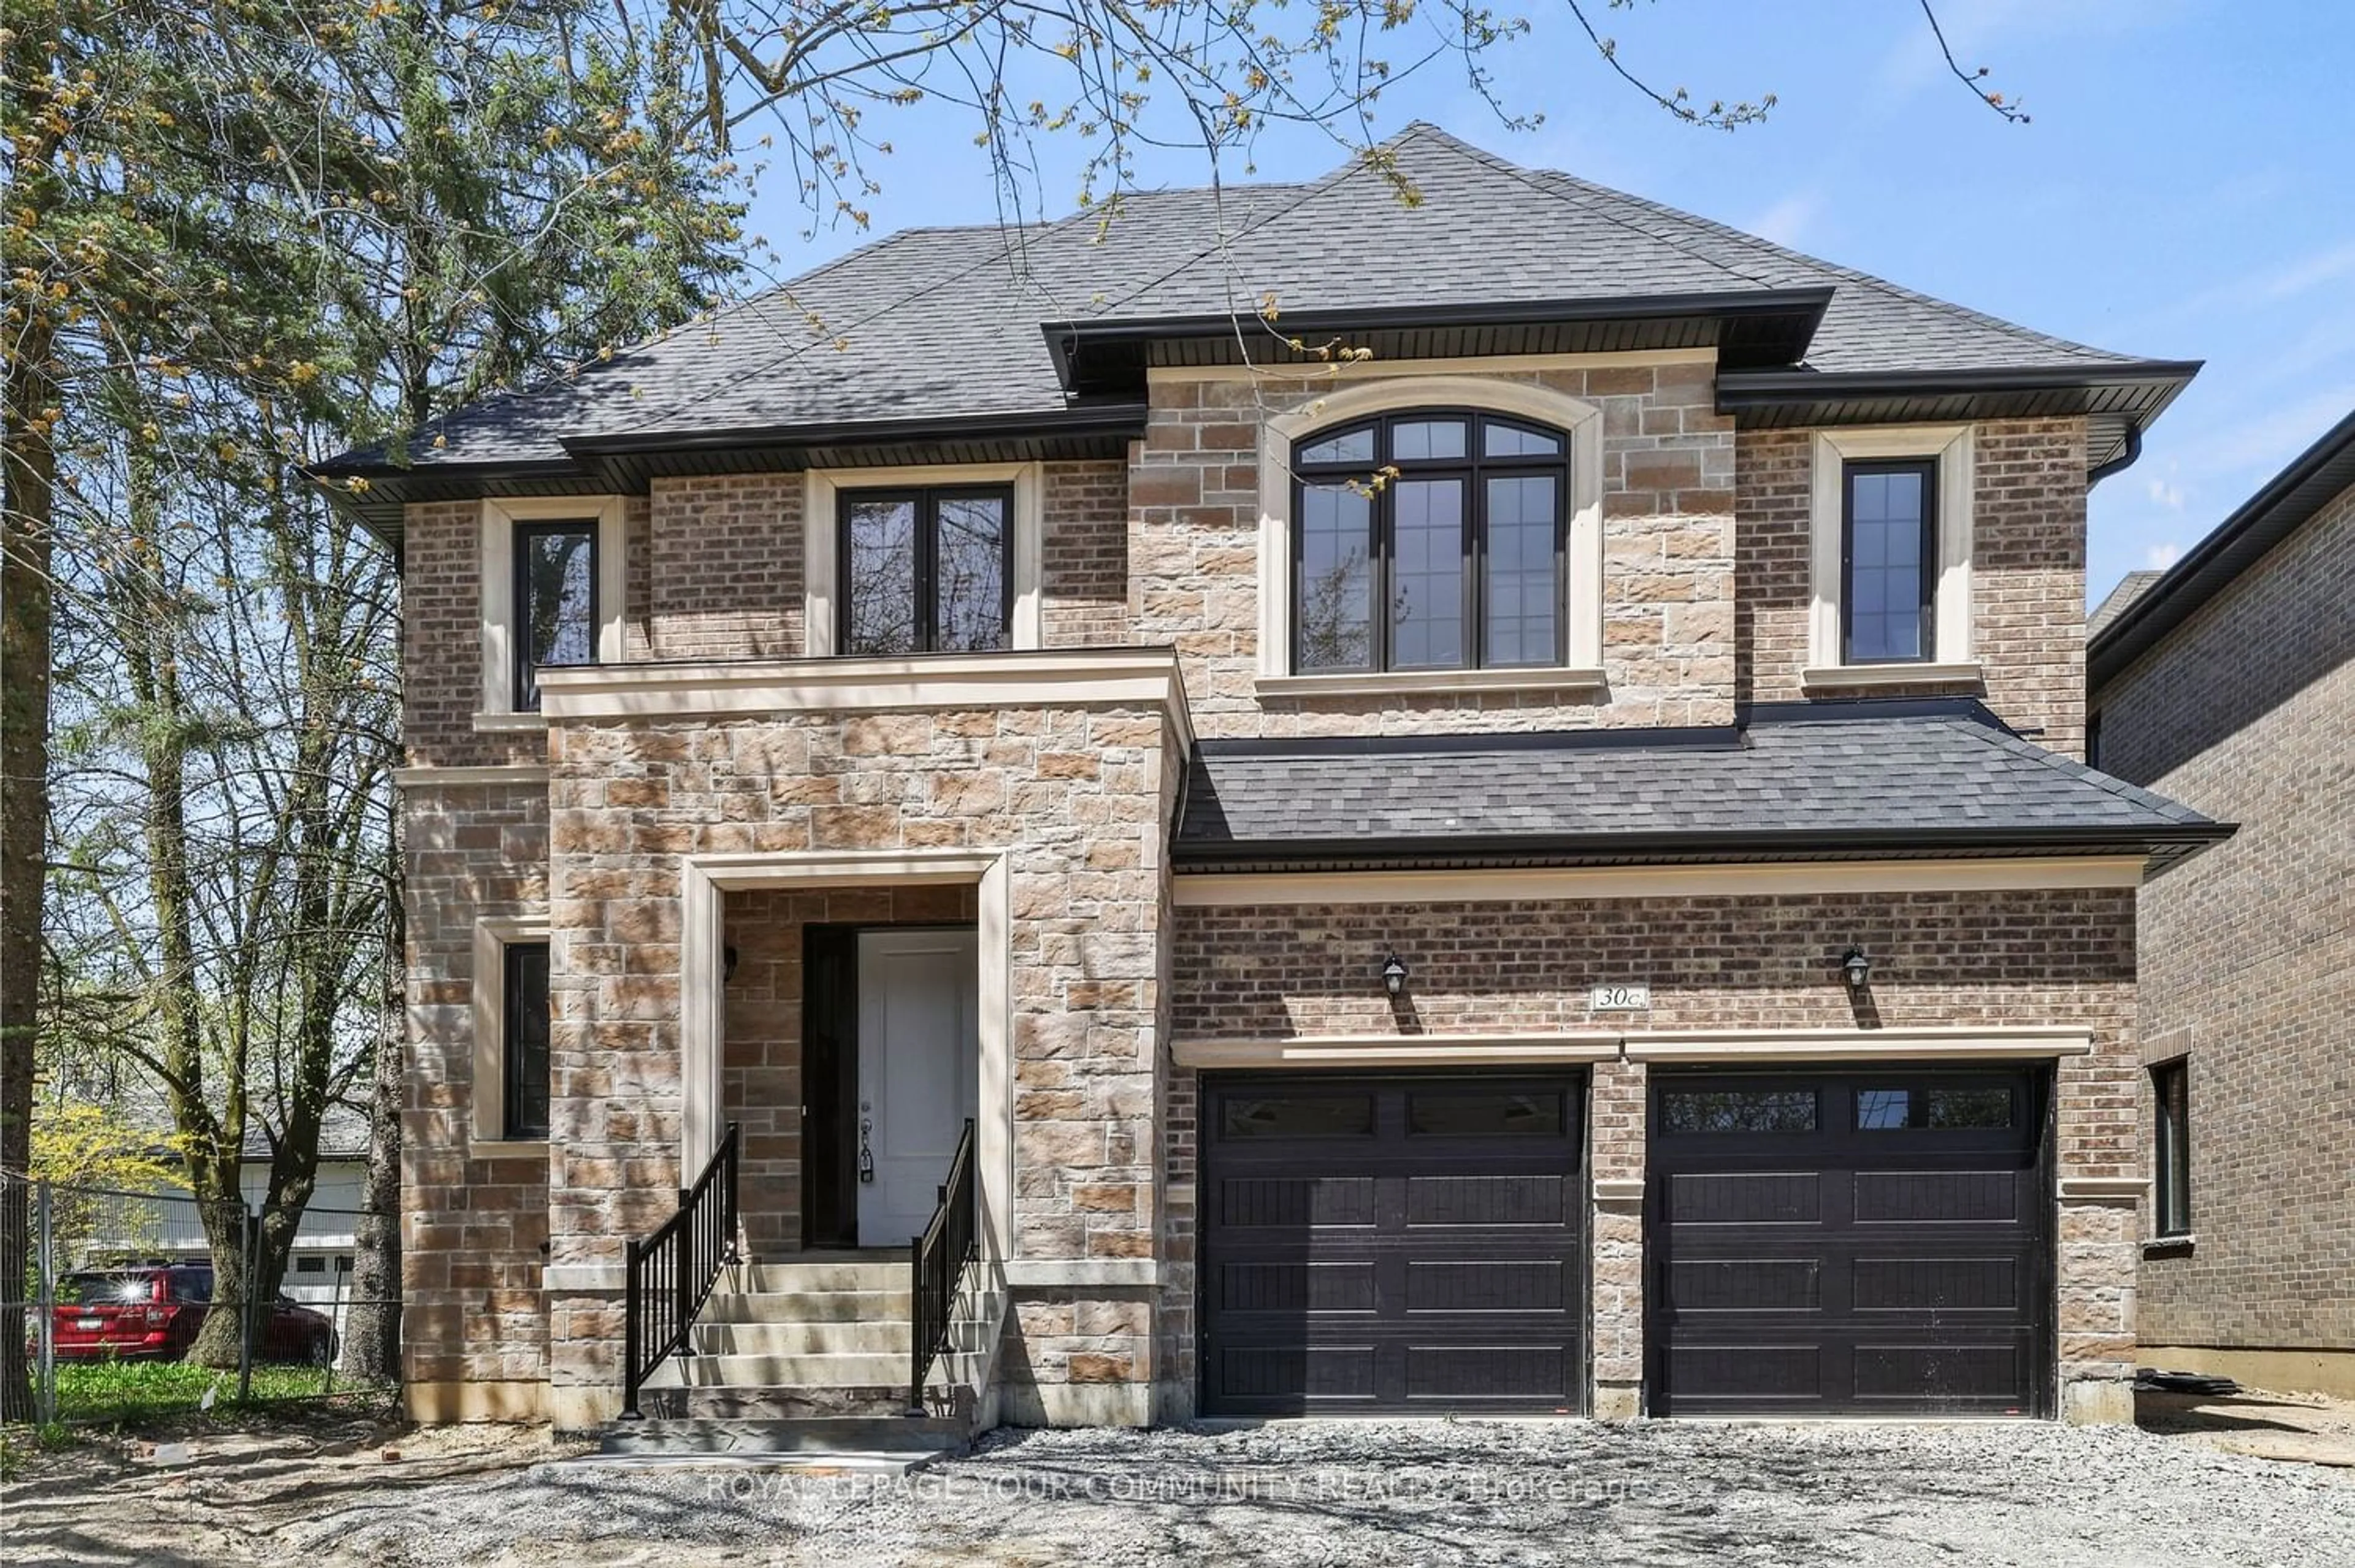 Home with brick exterior material for 30C Maple Grove Ave, Richmond Hill Ontario L4E 2T8